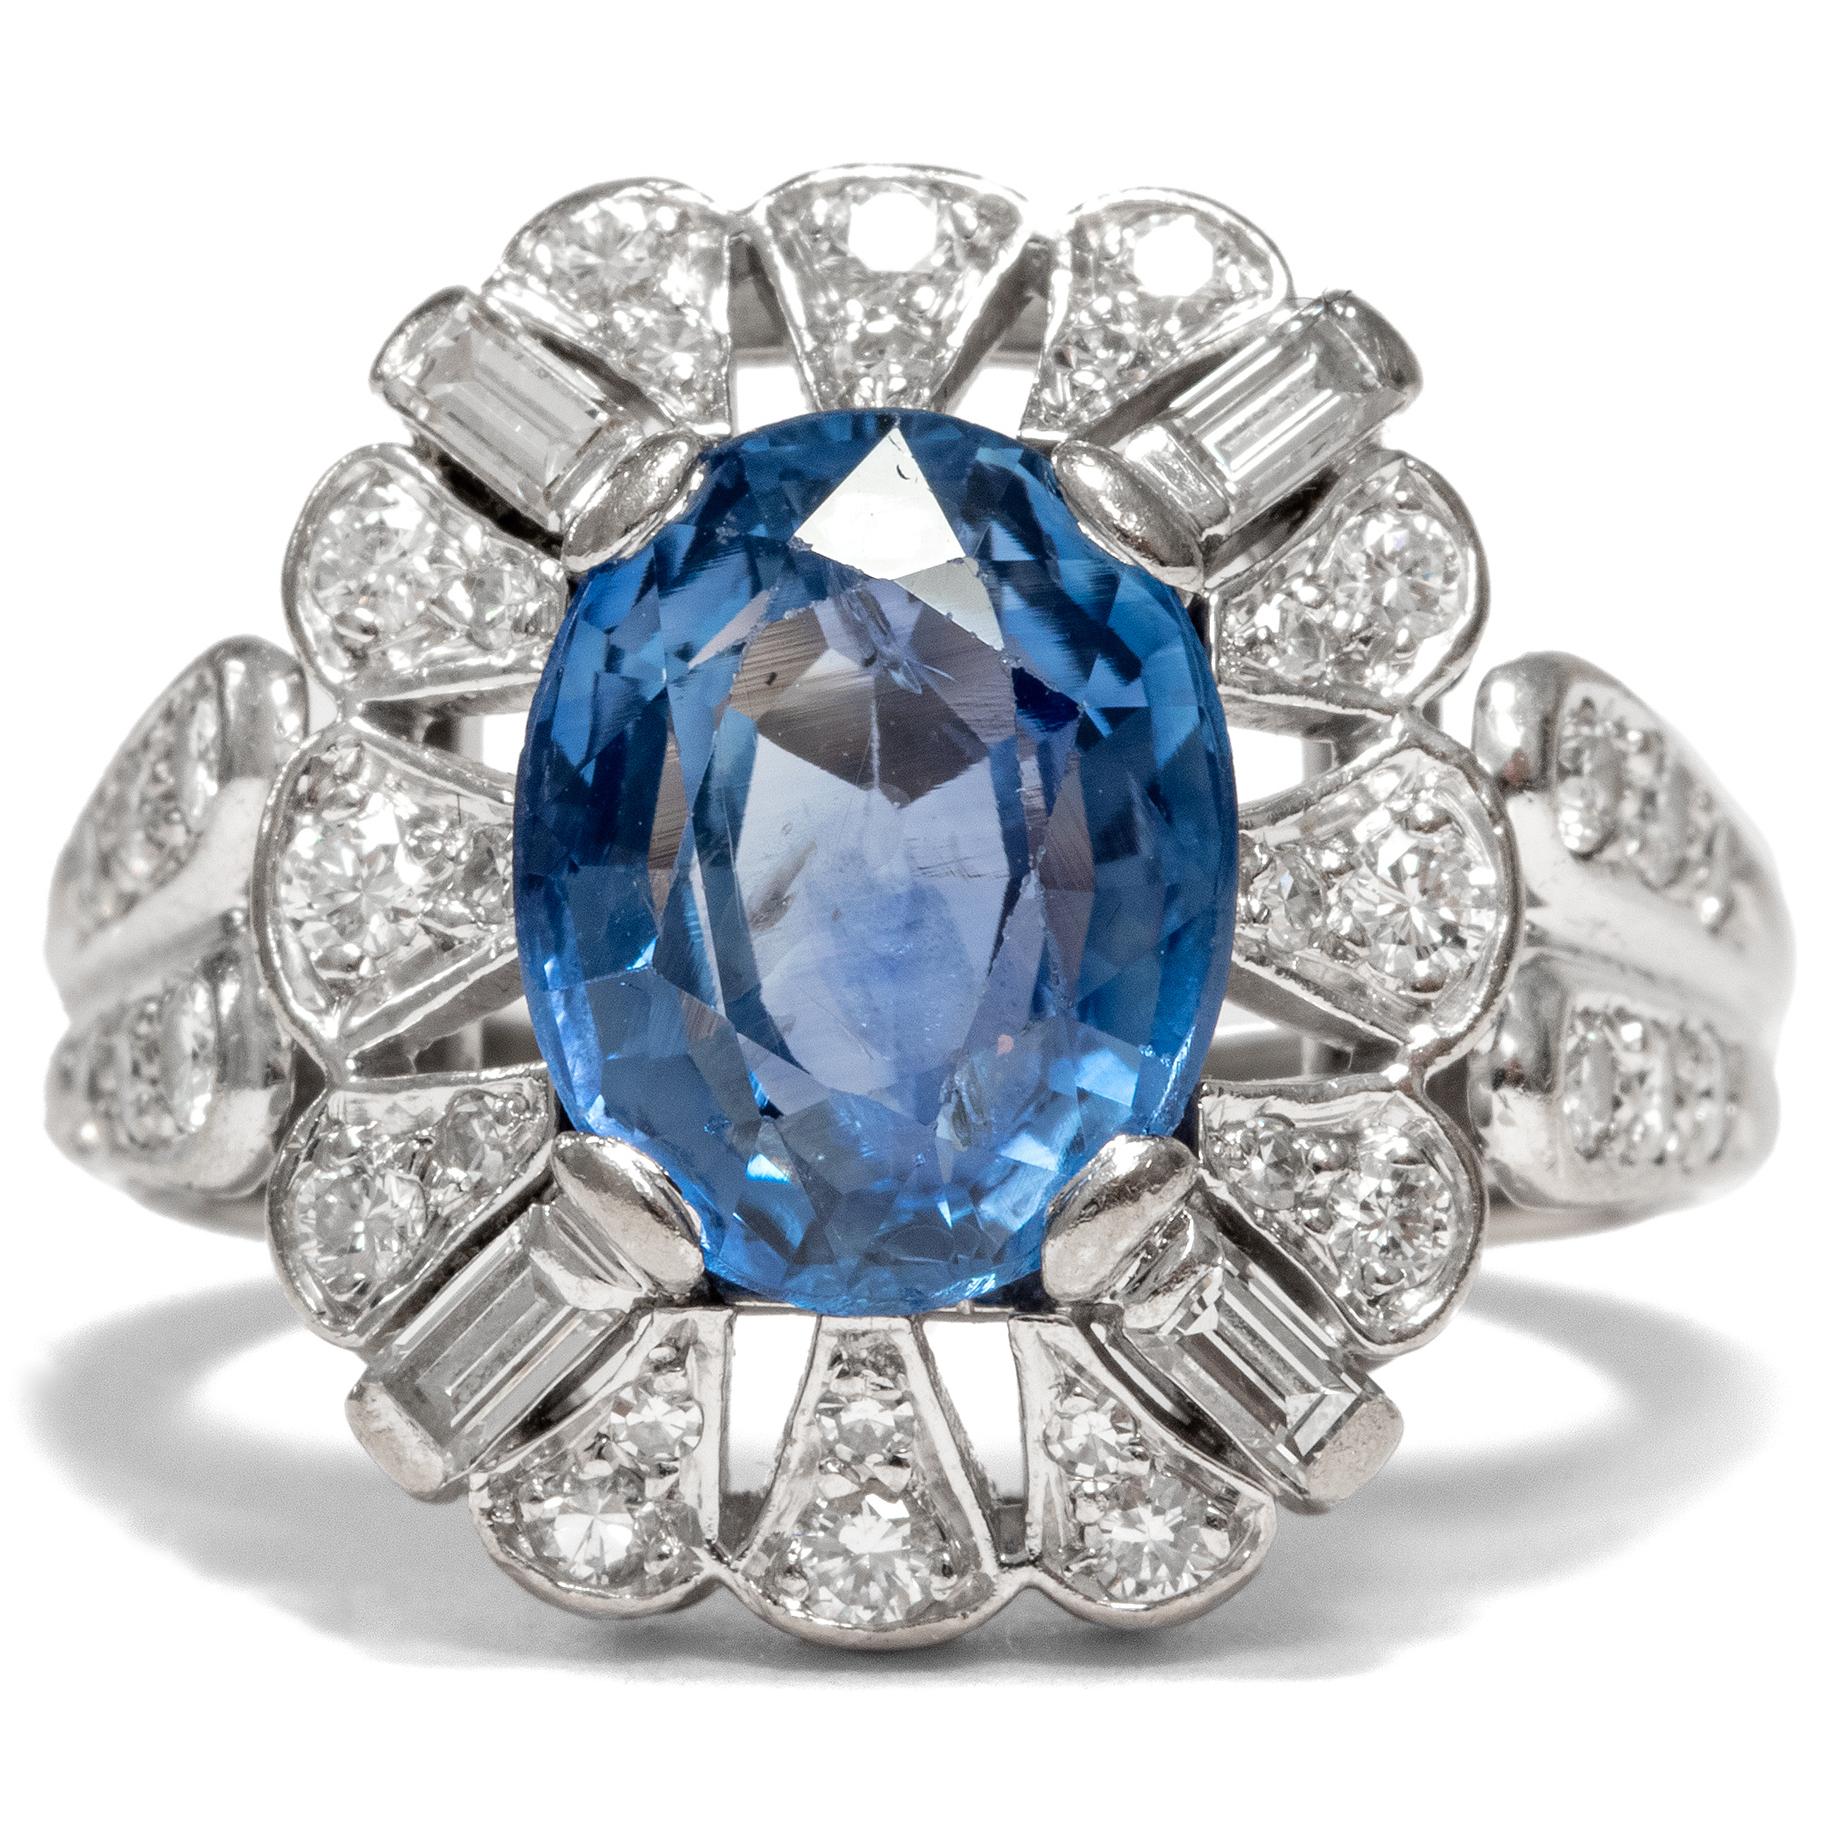 This vintage ring, created circa 1970, is a beautiful variation on the classic combination of diamonds and blue sapphire. 40 diamonds in varying cuts, amounting to an overall weight of approximately a carat, frame the large central sapphire of 5.80